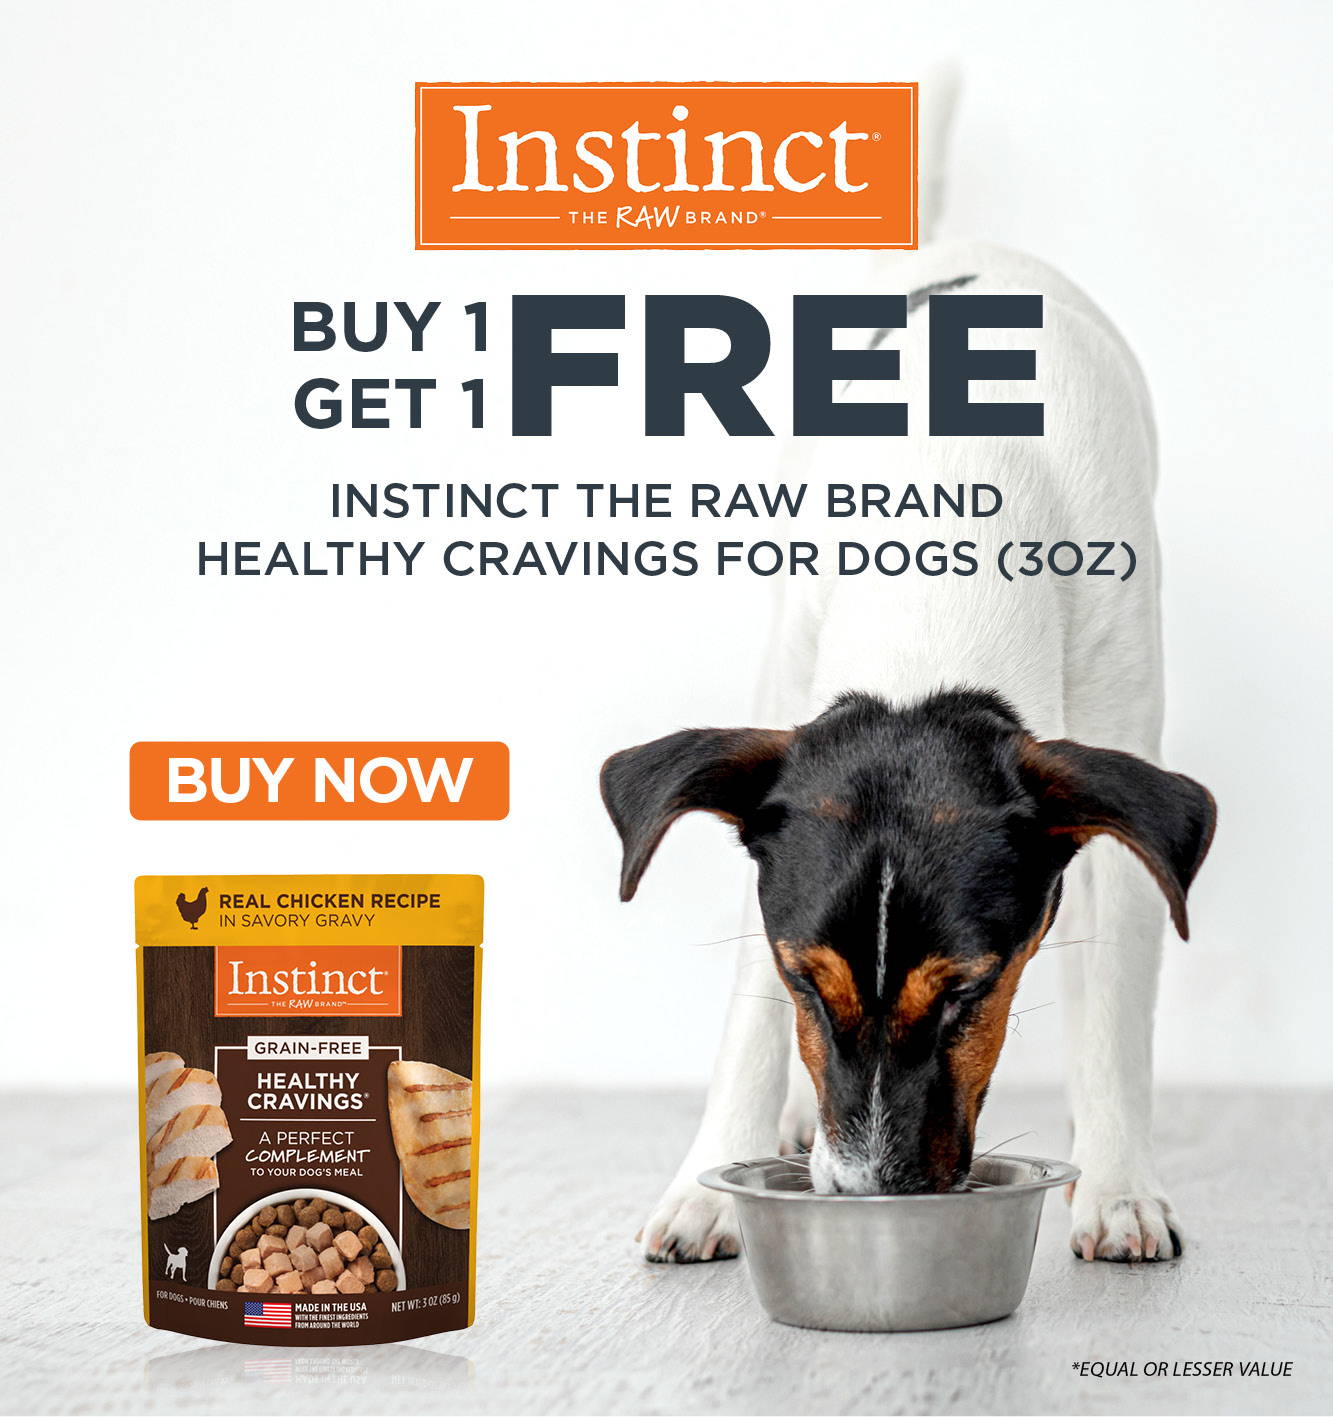 Buy 1, get 1 free Instinct The Raw Brand Healthy Cravings for Dogs (3oz)